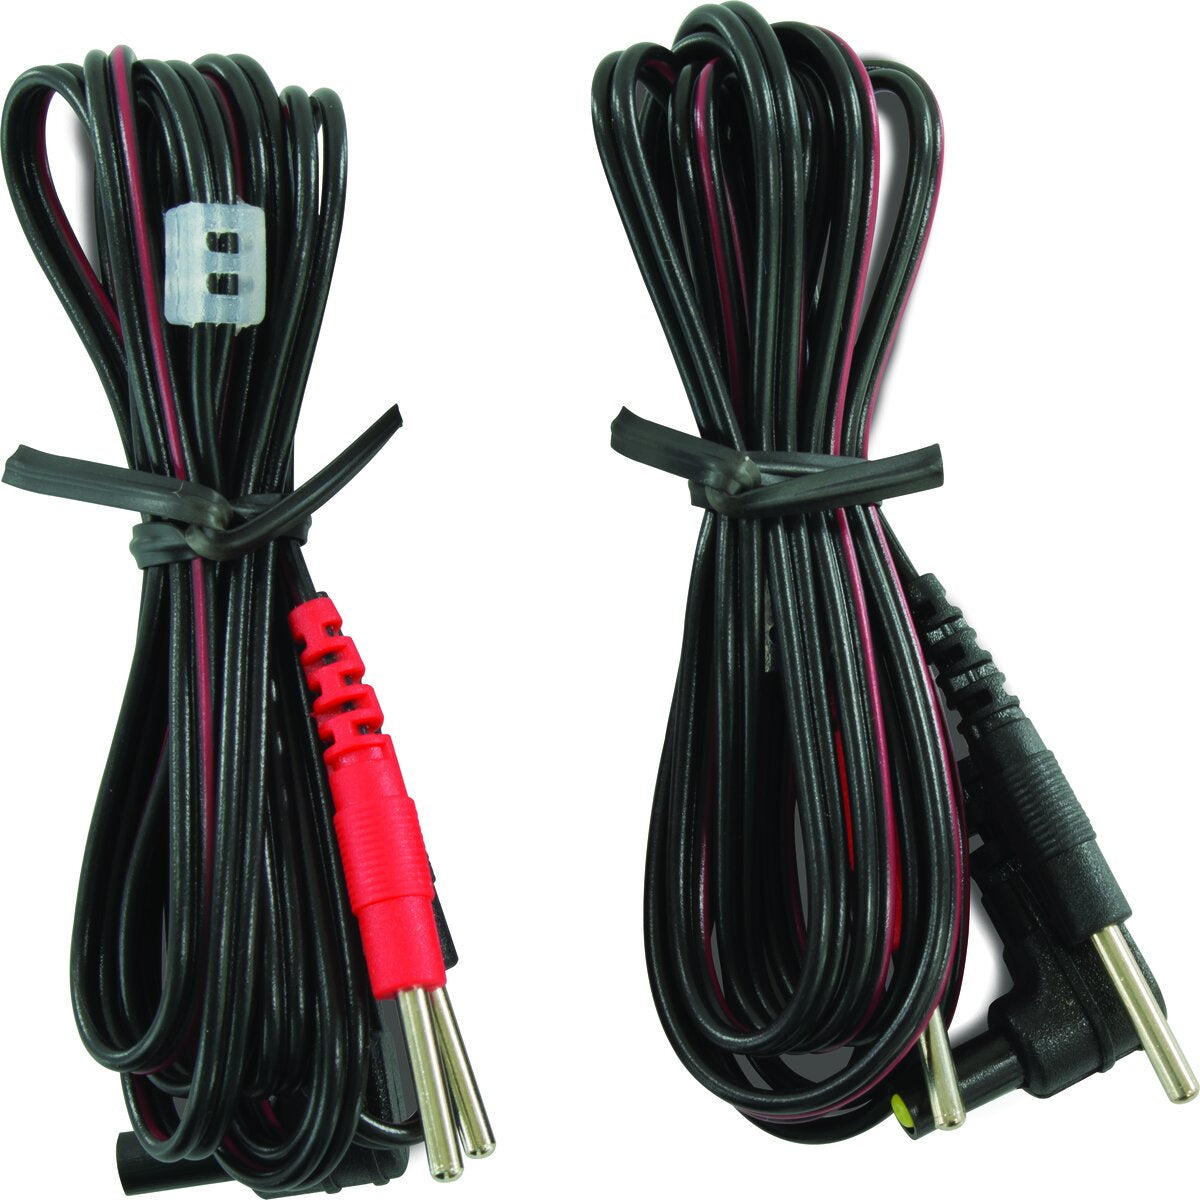 Standard 45" TENS Lead Wire (pack of 2)